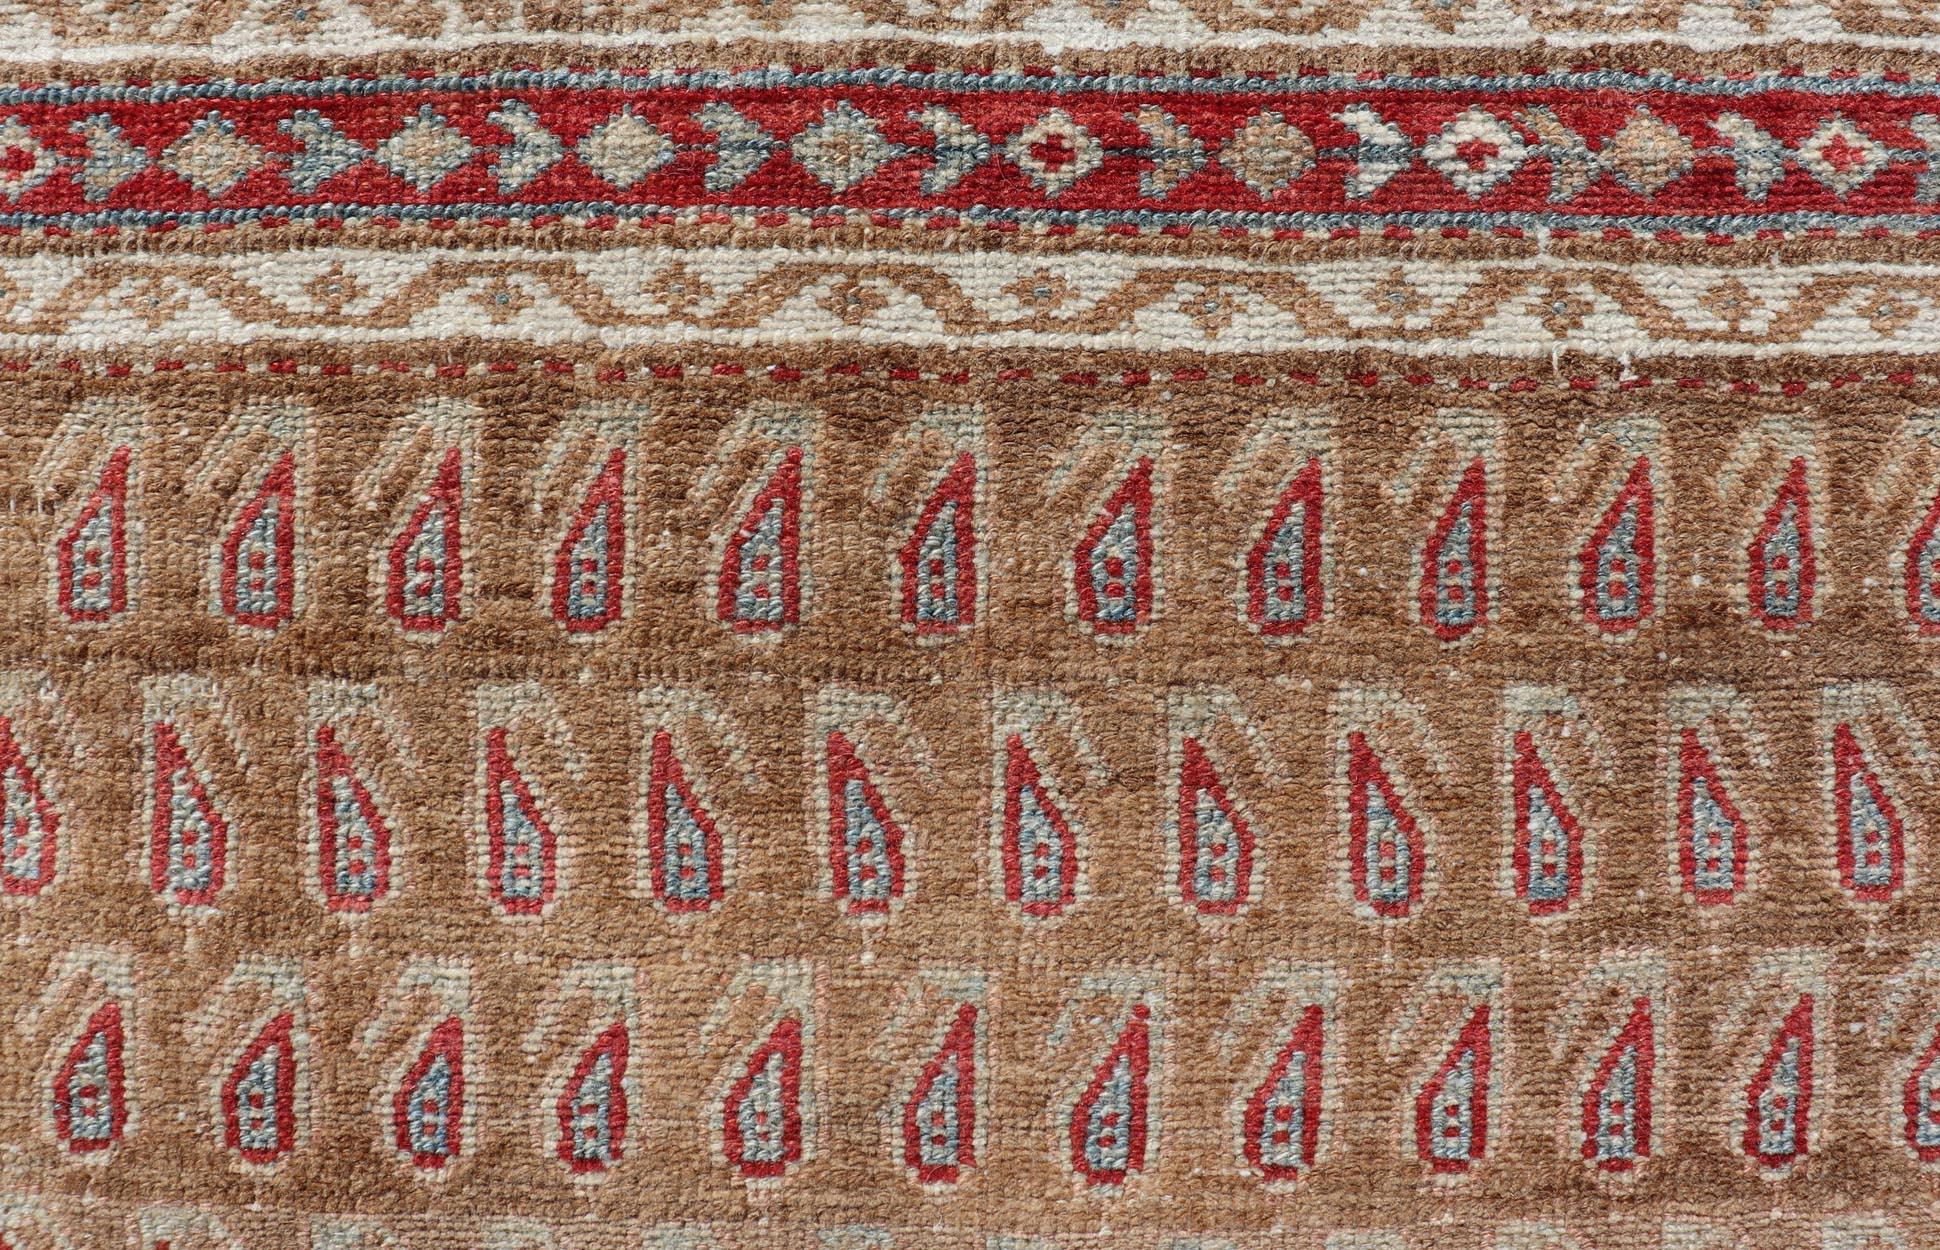 Antique Malayer Runner with All-Over Paisley Design in Red, Brown, and Blue For Sale 4